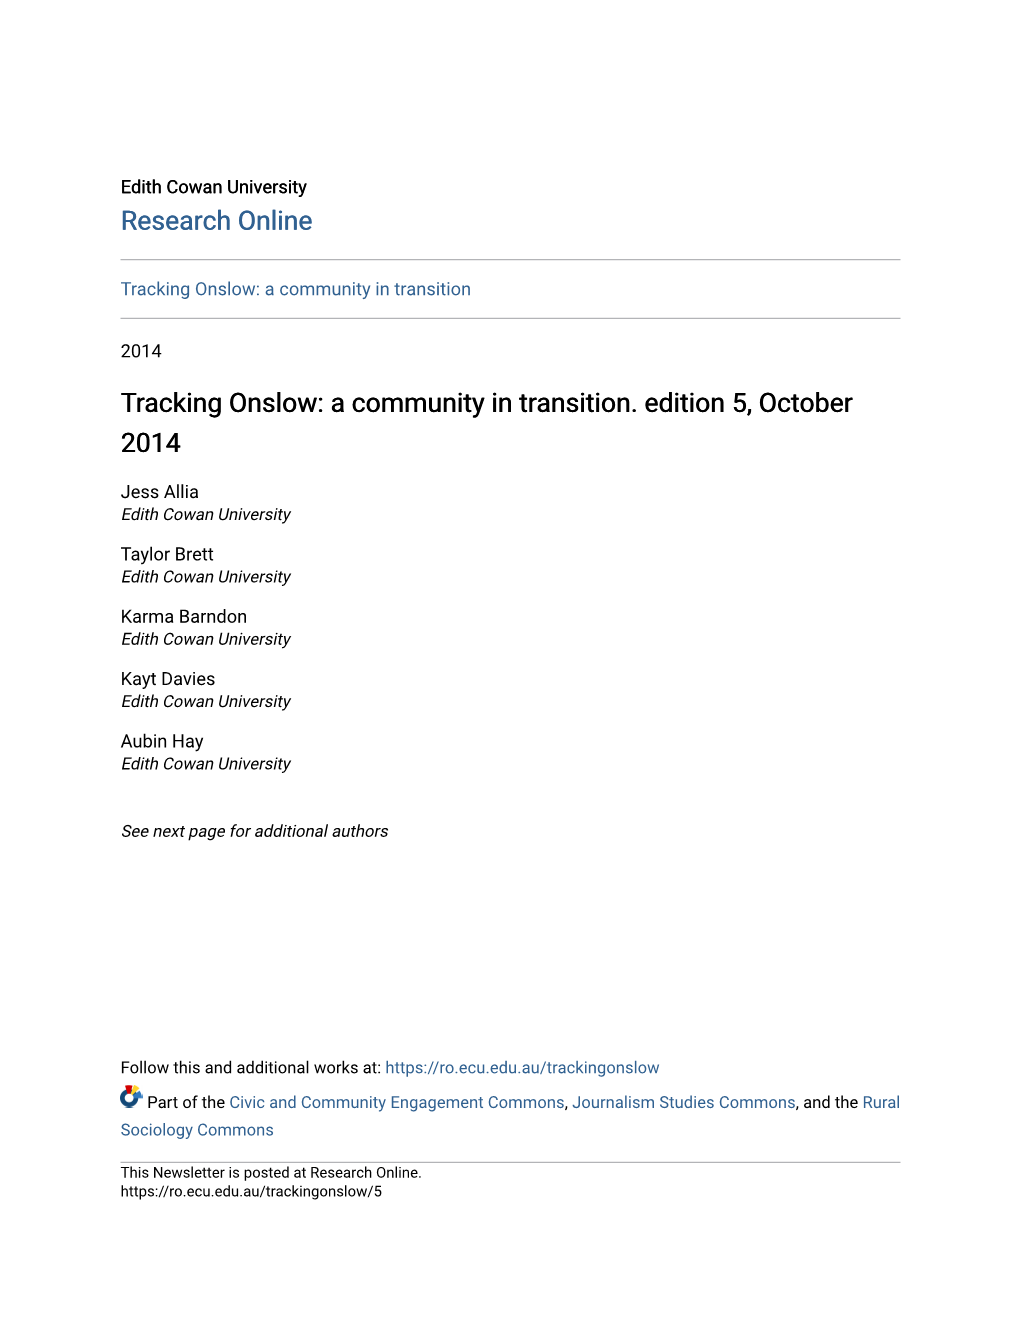 Tracking Onslow: a Community in Transition. Edition 5, October 2014